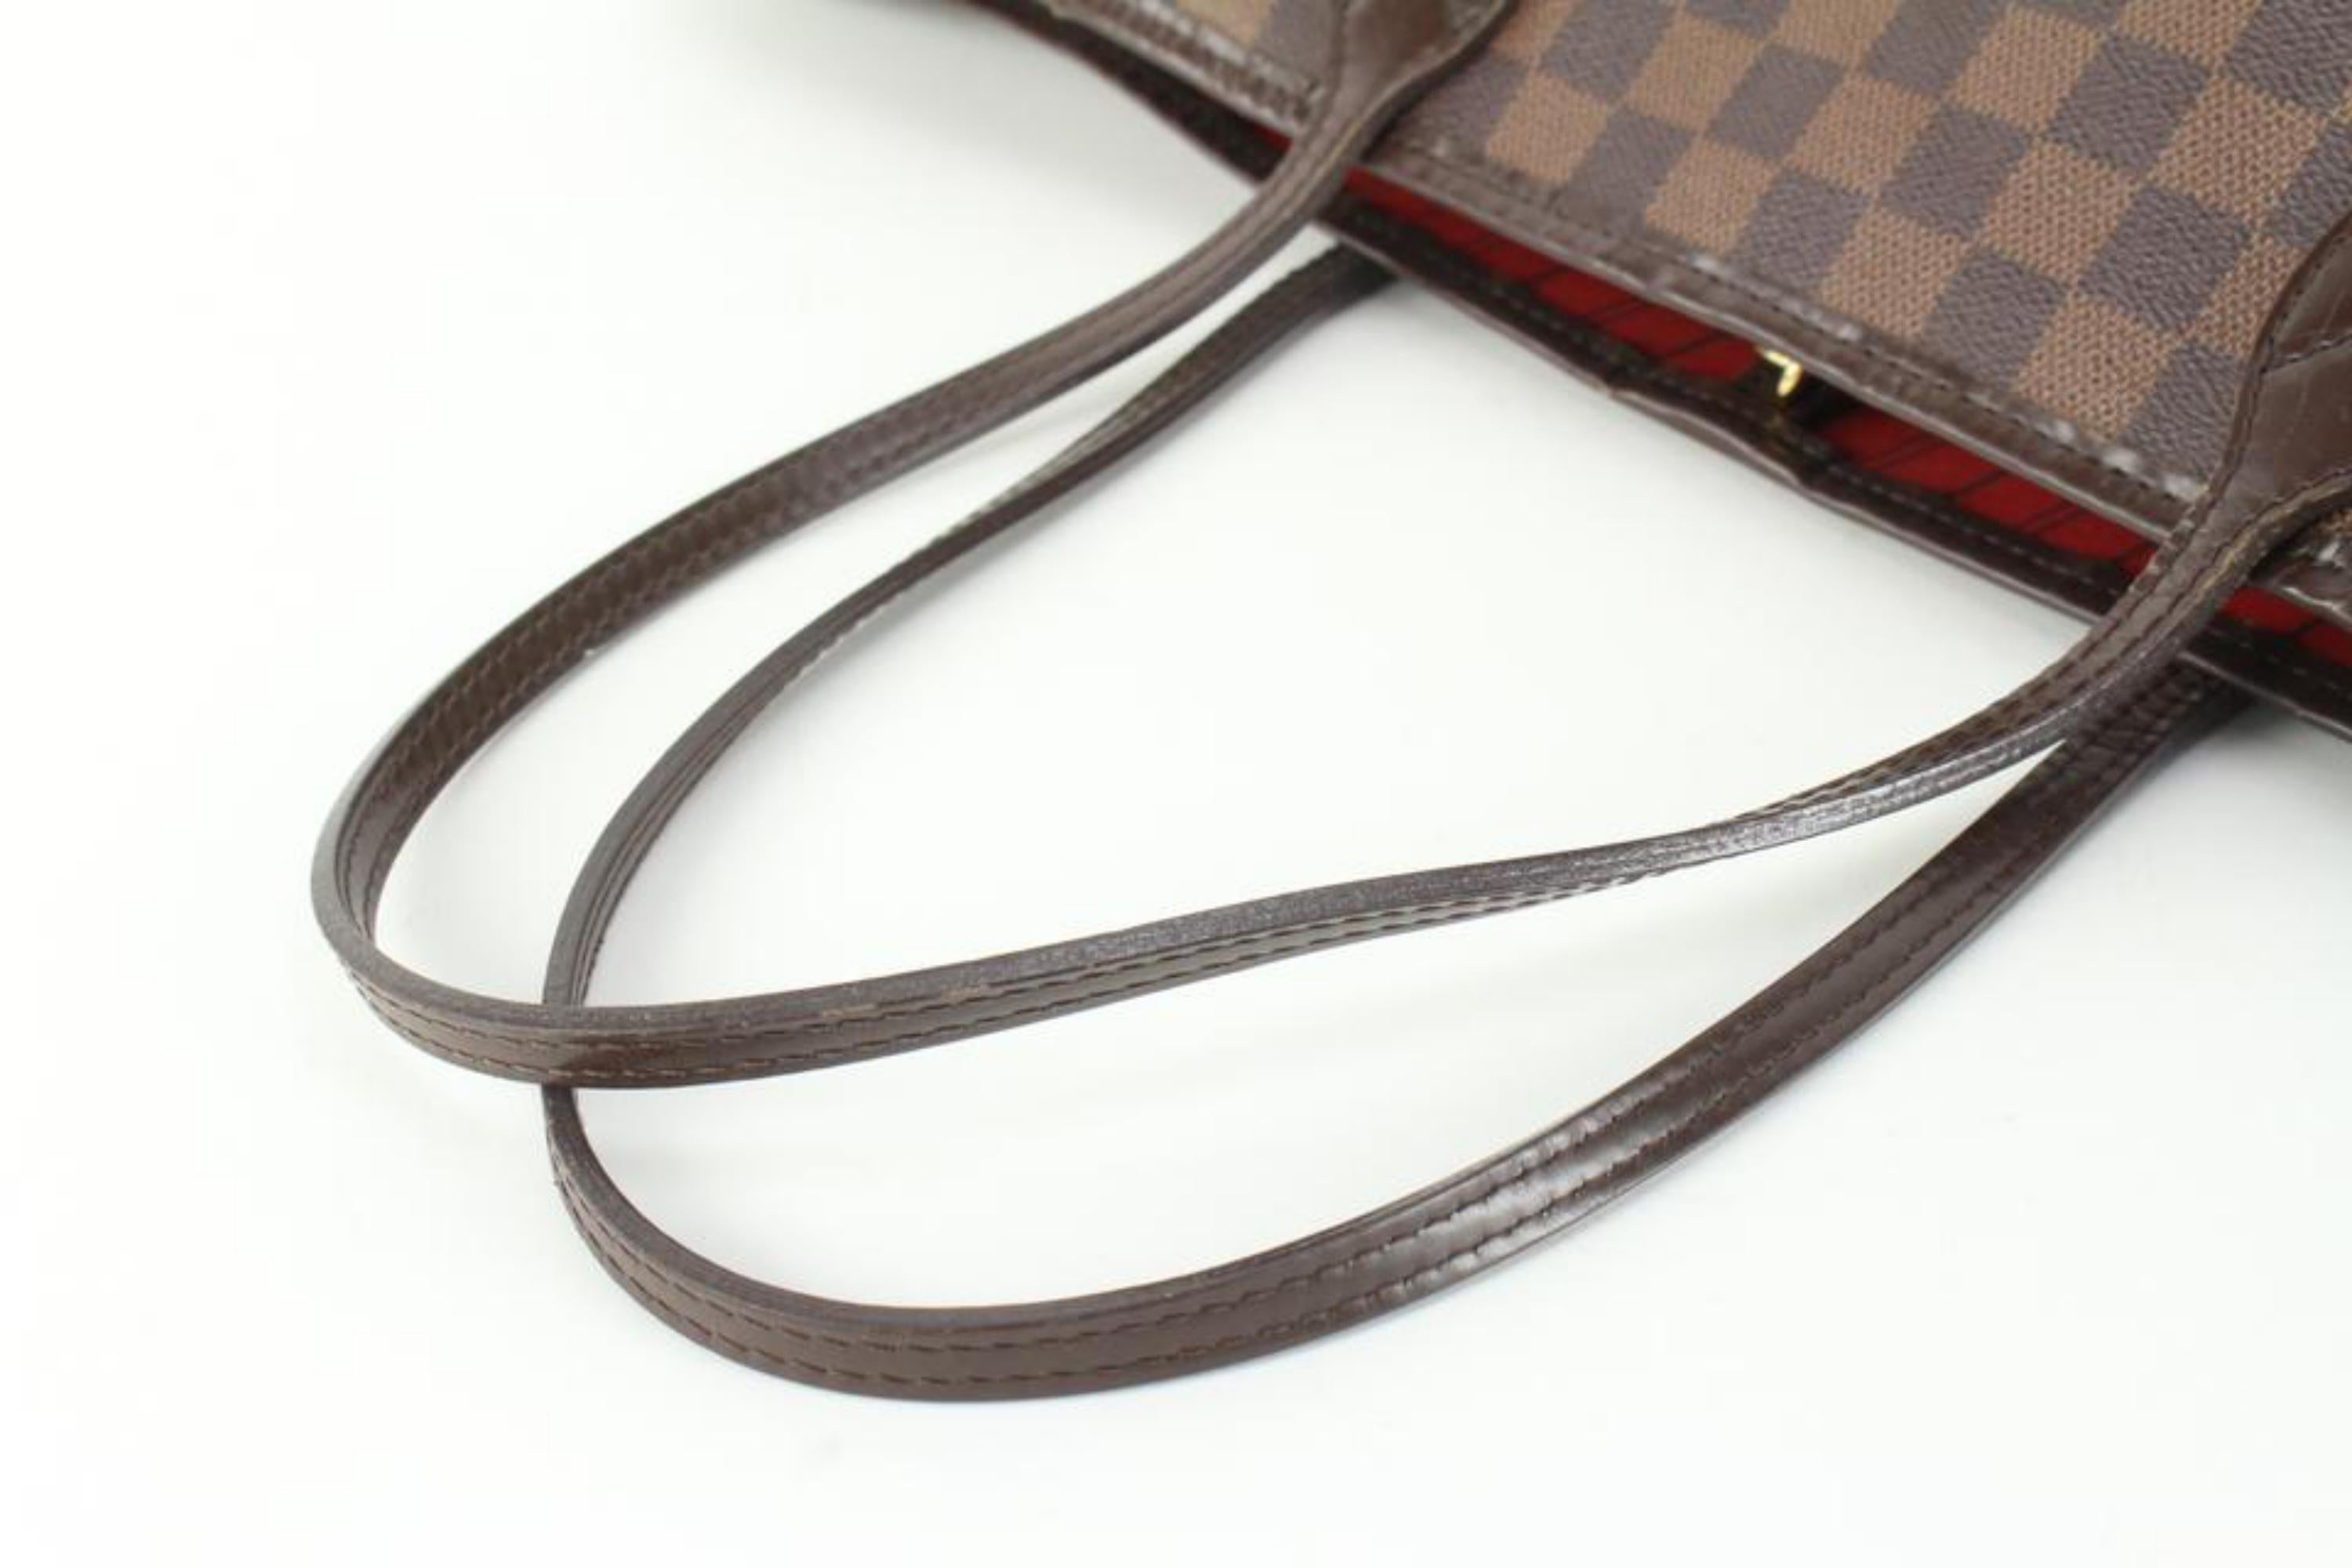 LOUIS VUITTON Used Bag Damier Ebene Brown Neverfull GM Tote